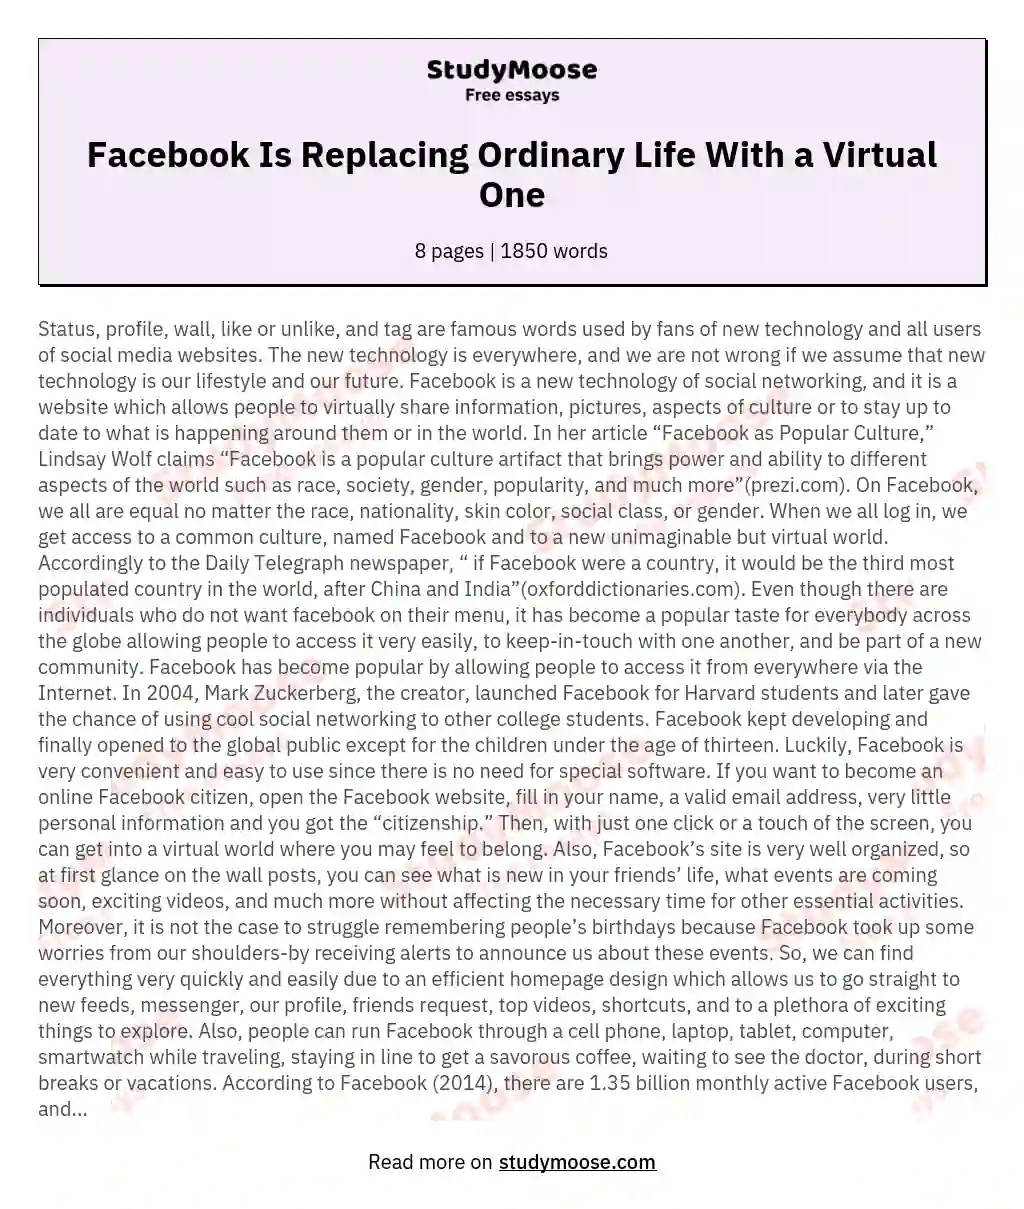 Facebook Is Replacing Ordinary Life With a Virtual One essay